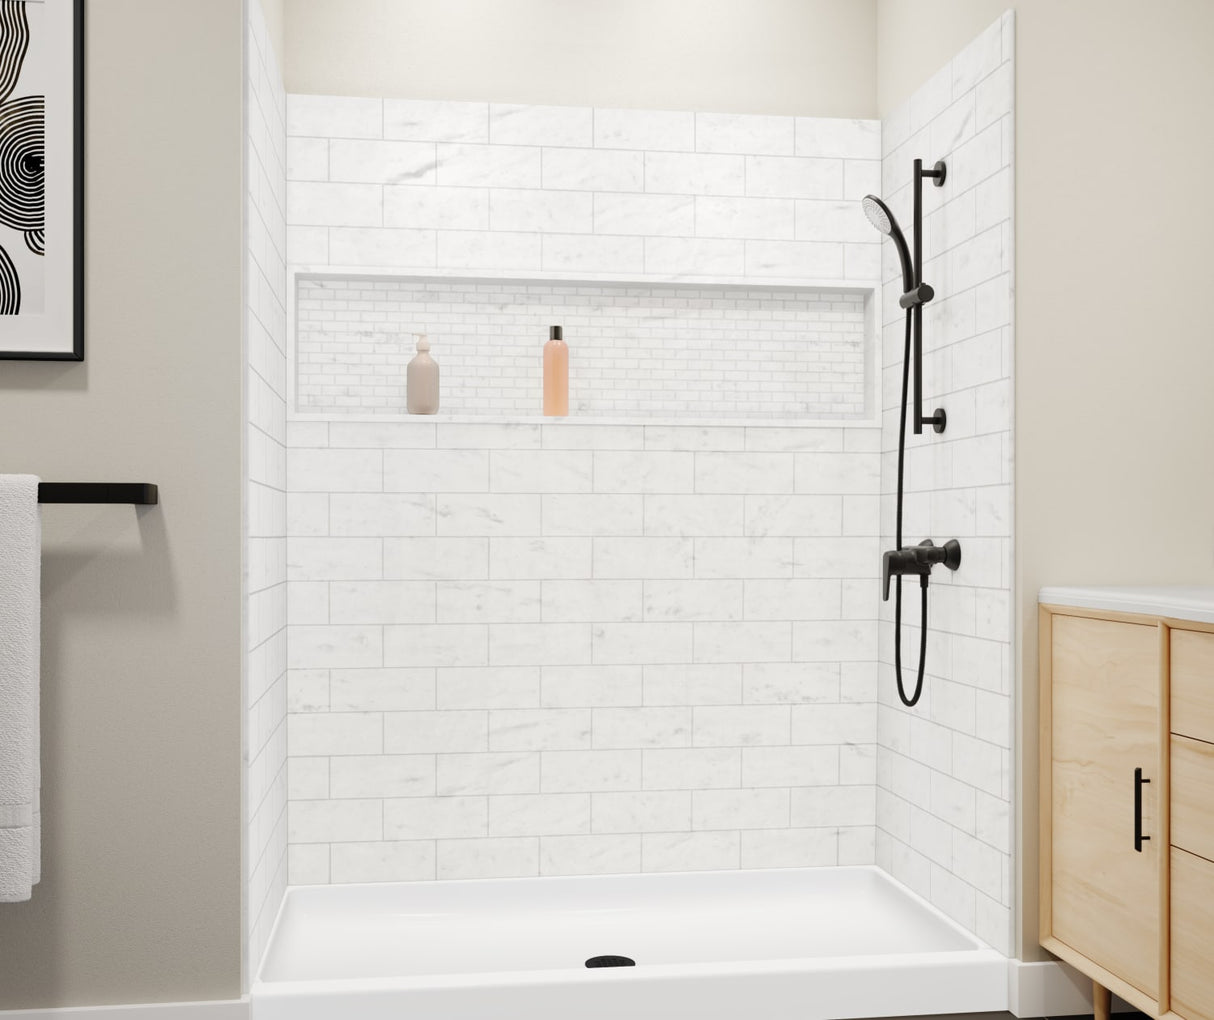 Swanstone NexTile 6032 Direct-to-Stud Four-Piece Alcove Shower Wall Kit in Carrara SE6032S.221